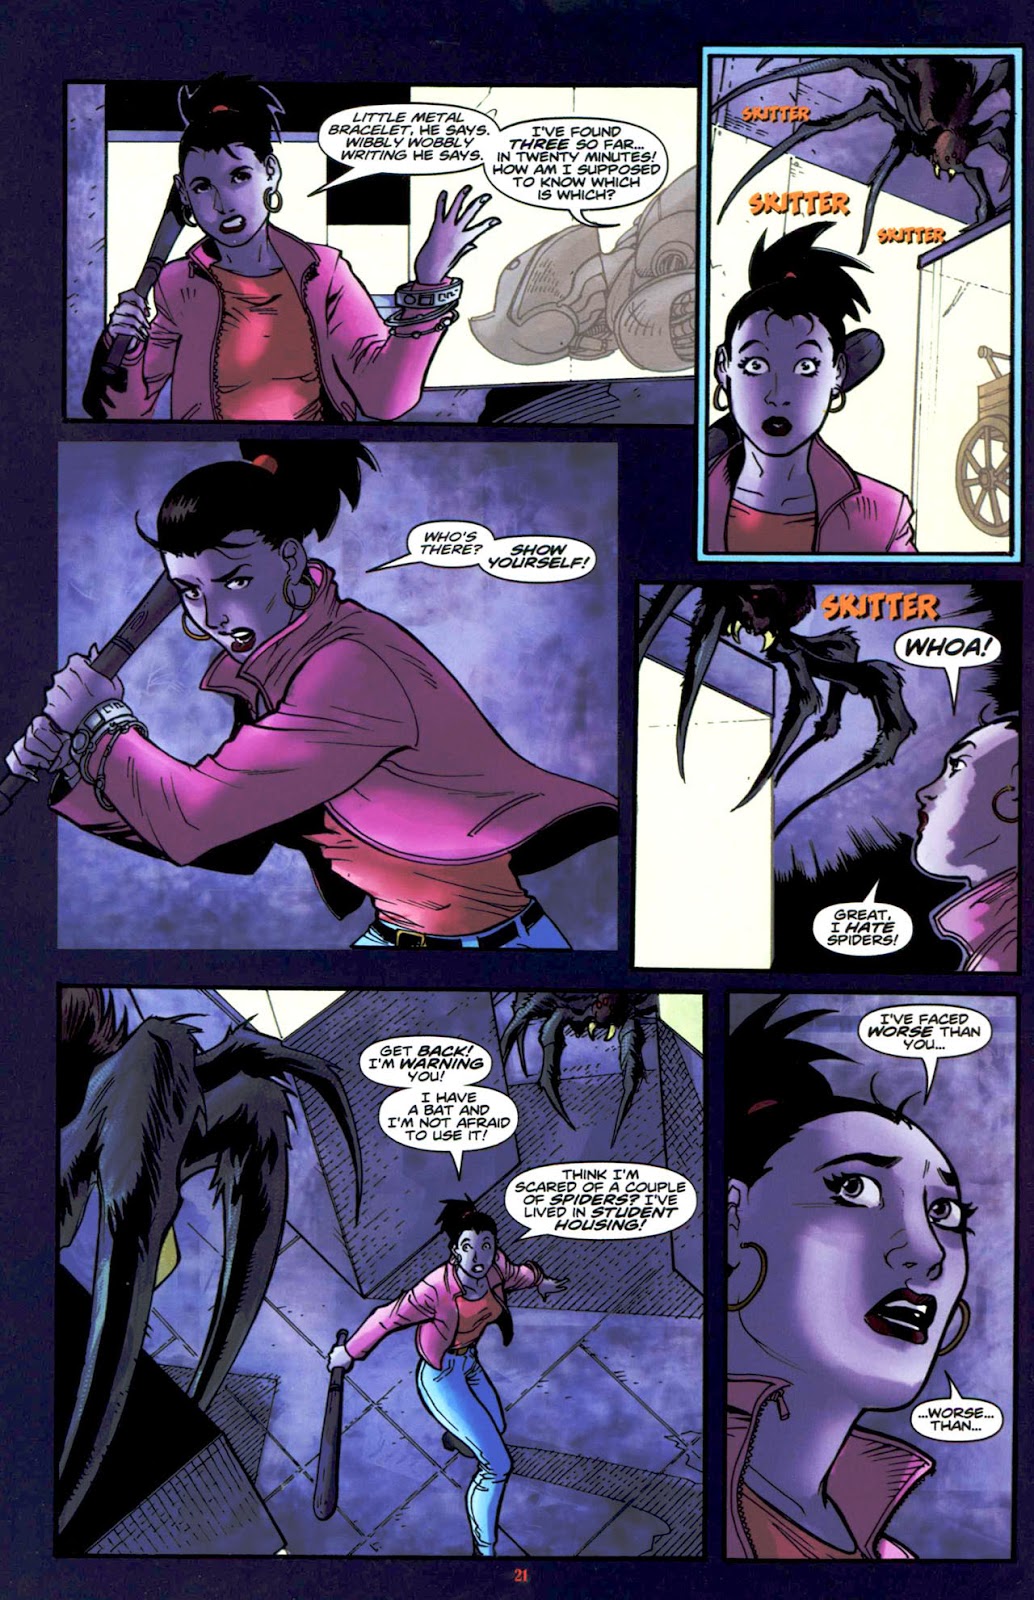 Doctor Who: The Forgotten issue 3 - Page 22